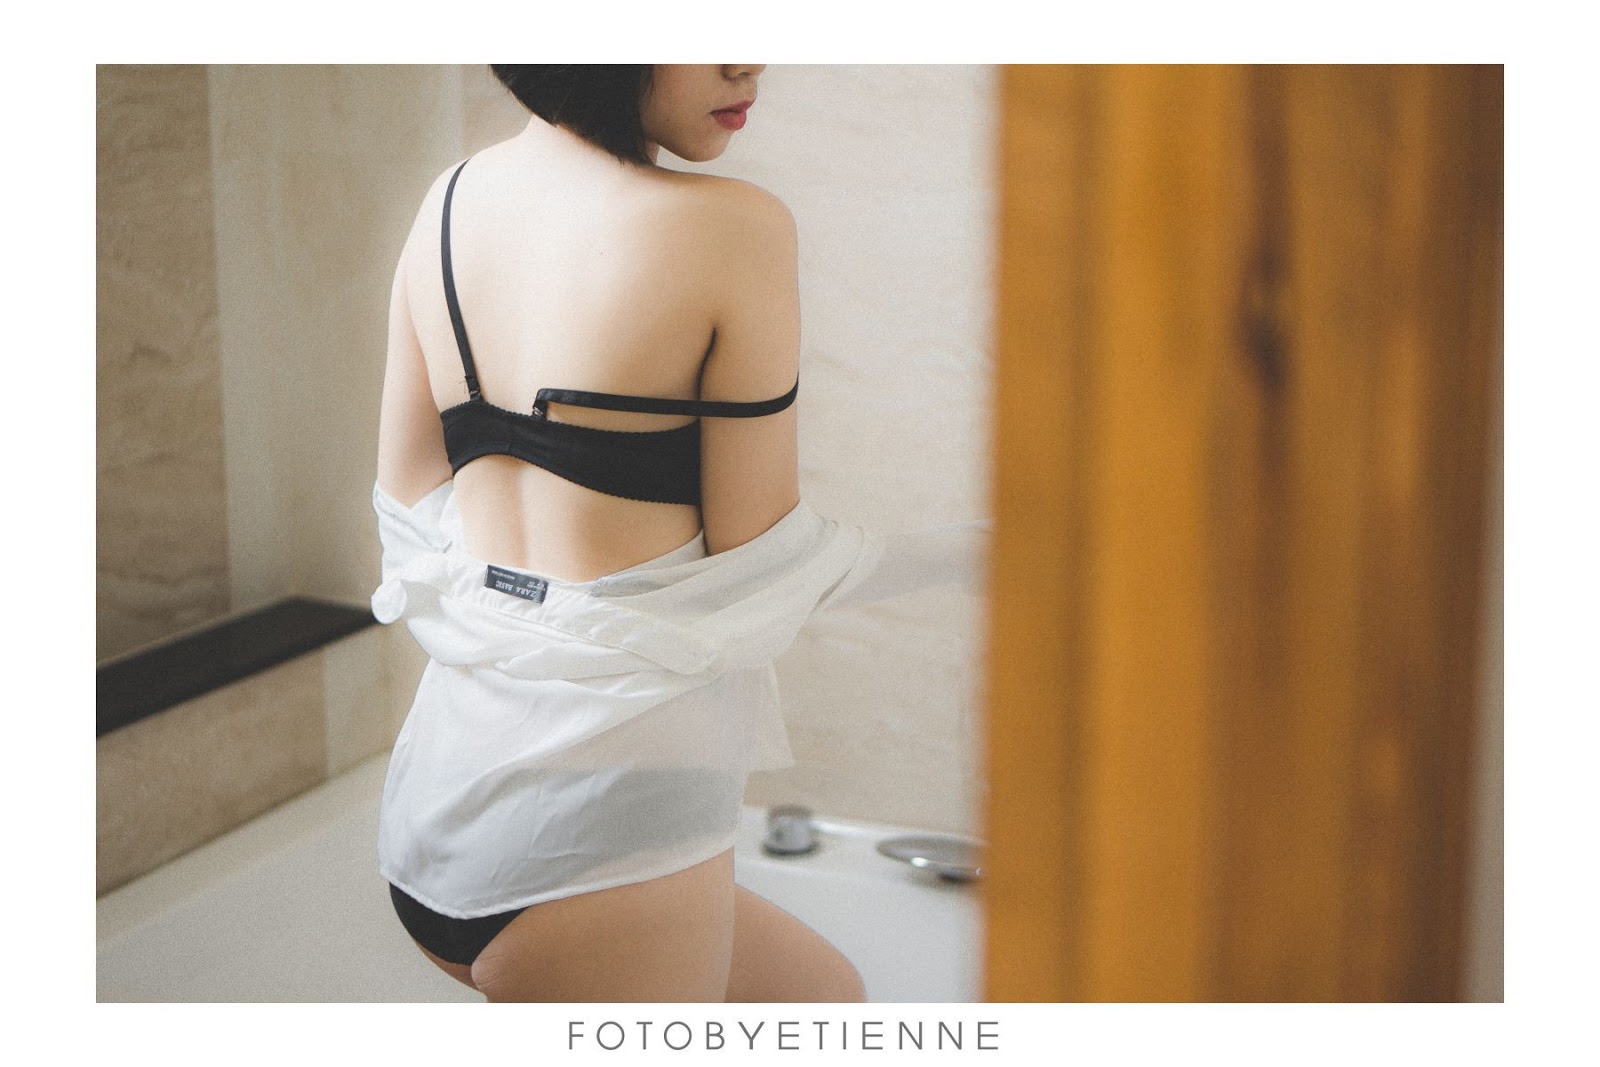 Super hot photos of Vietnamese beauties with lingerie and bikini - Photo by Le Blanc Studio - Part 4 - Picture 66